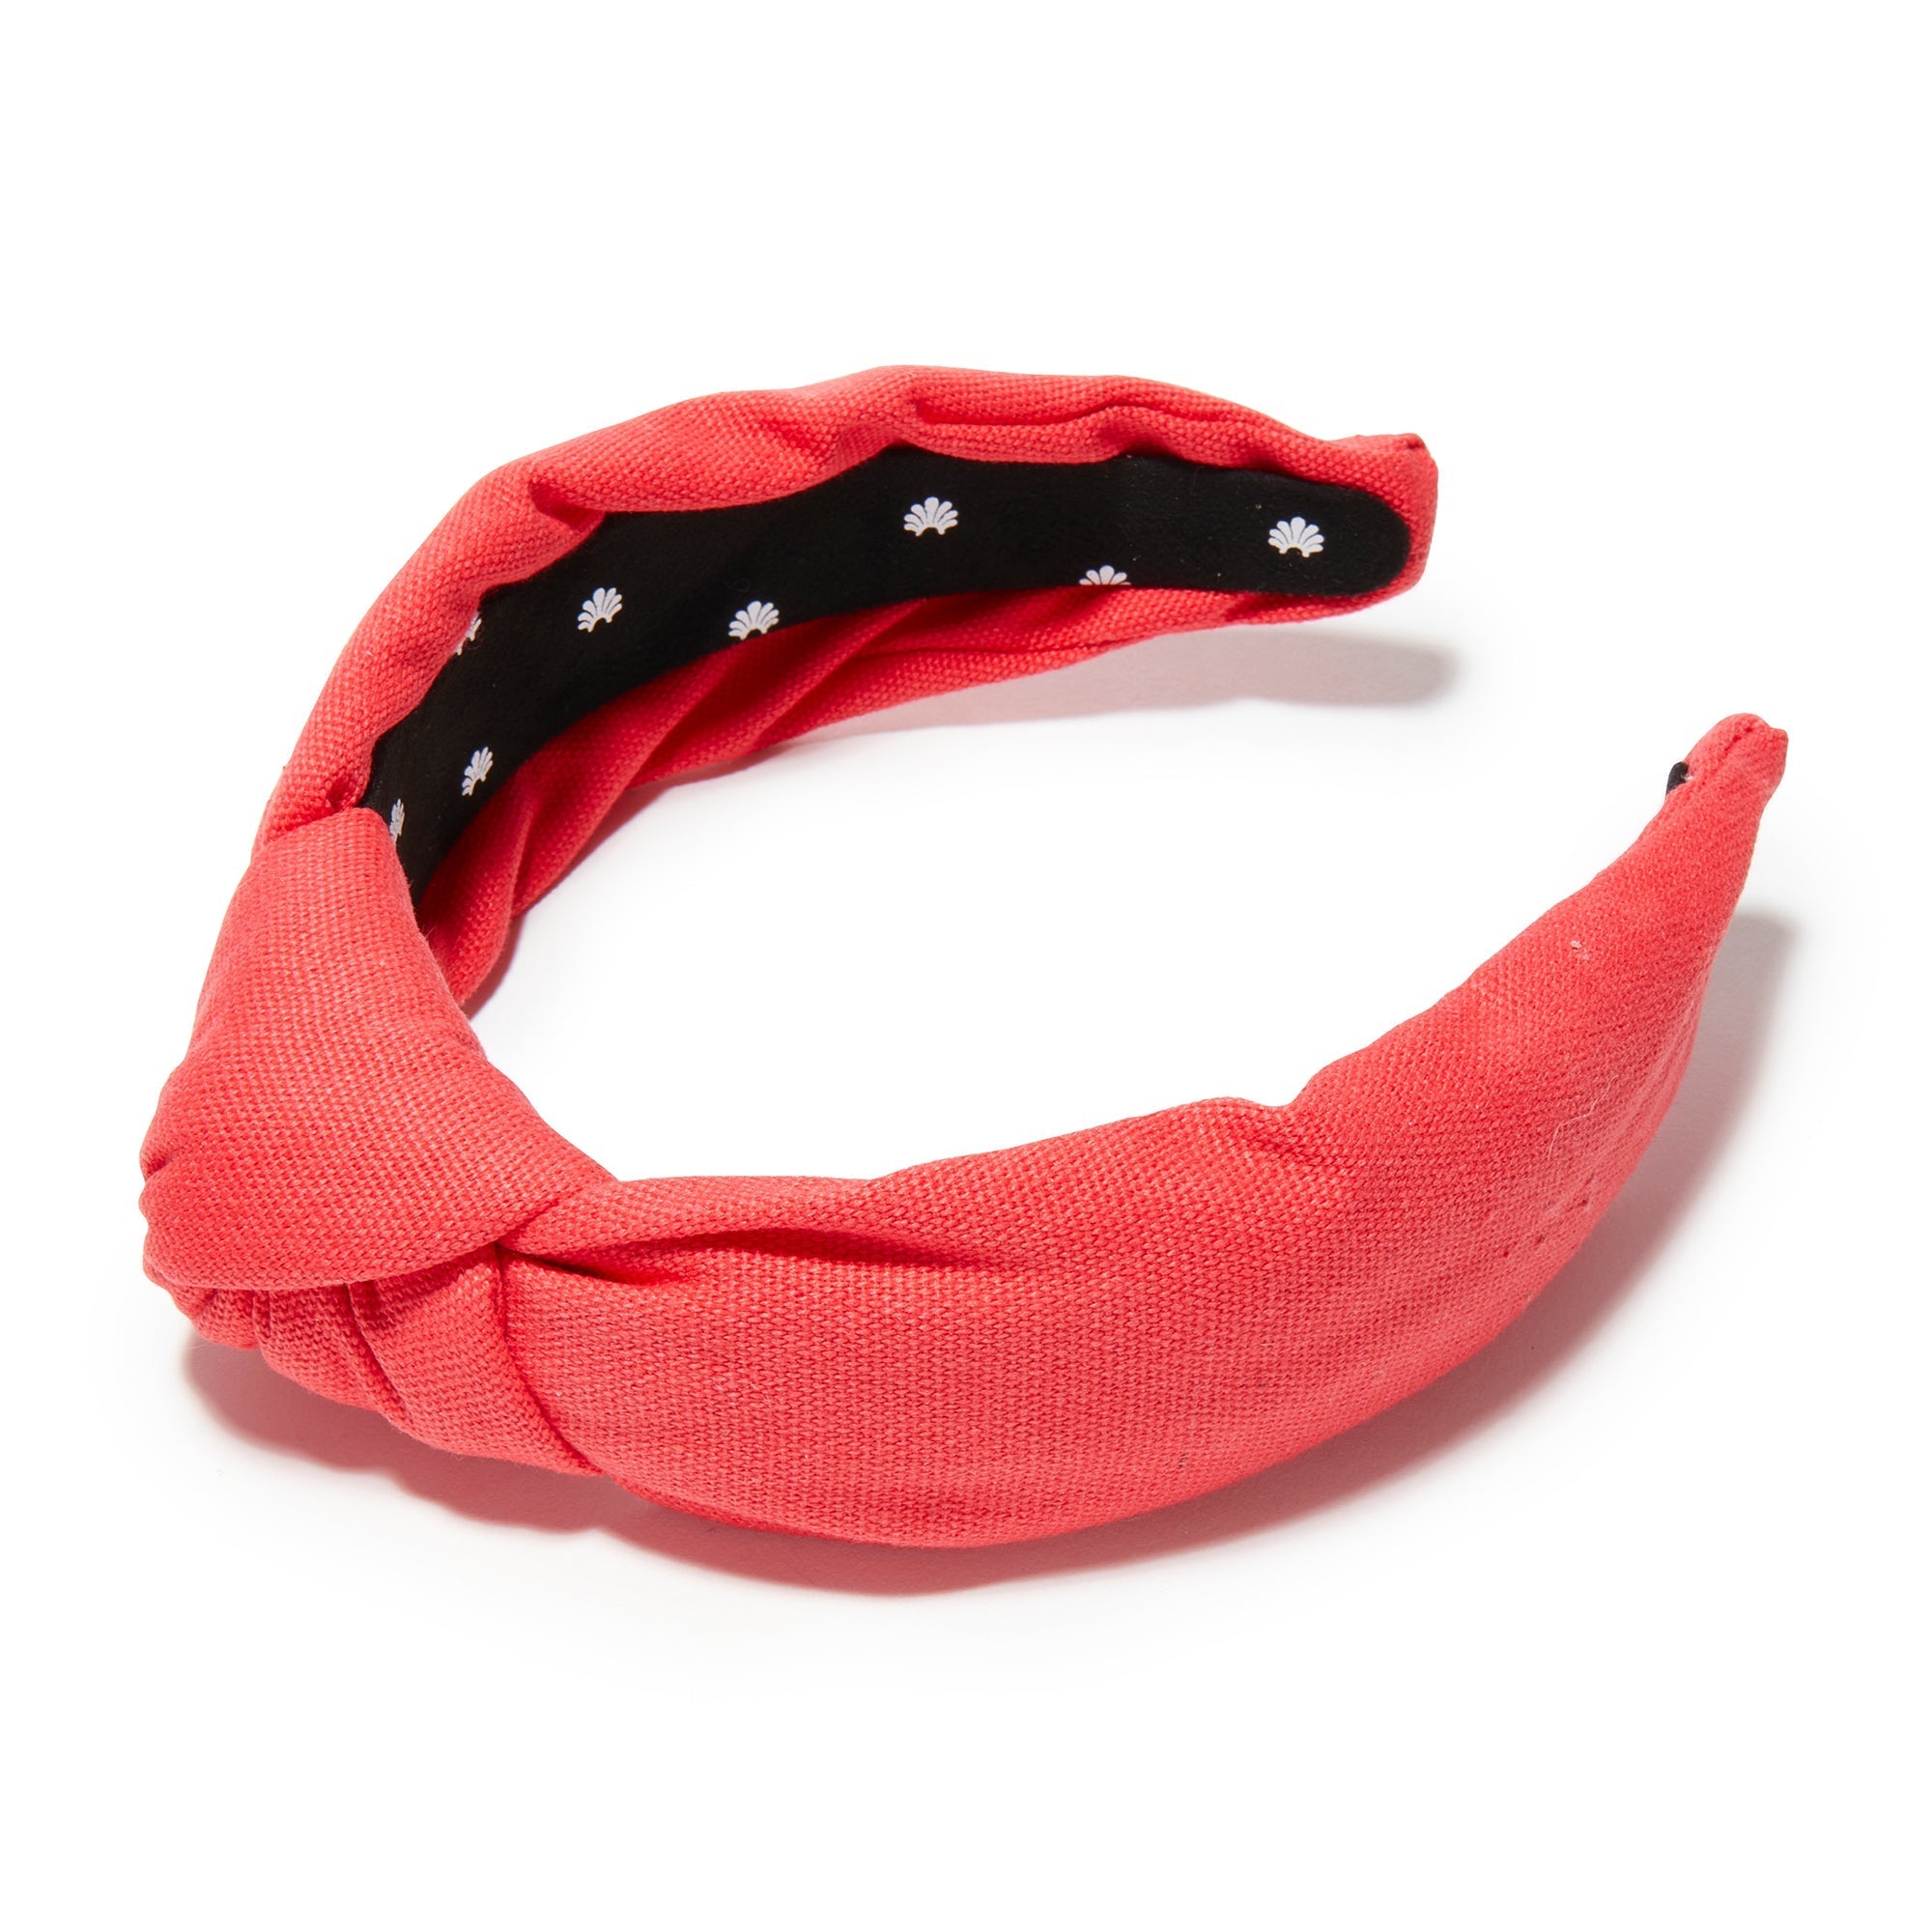 Lele Sadoughi HEADBANDS ONE SIZE RED WOVEN KNOTTED HEADBAND